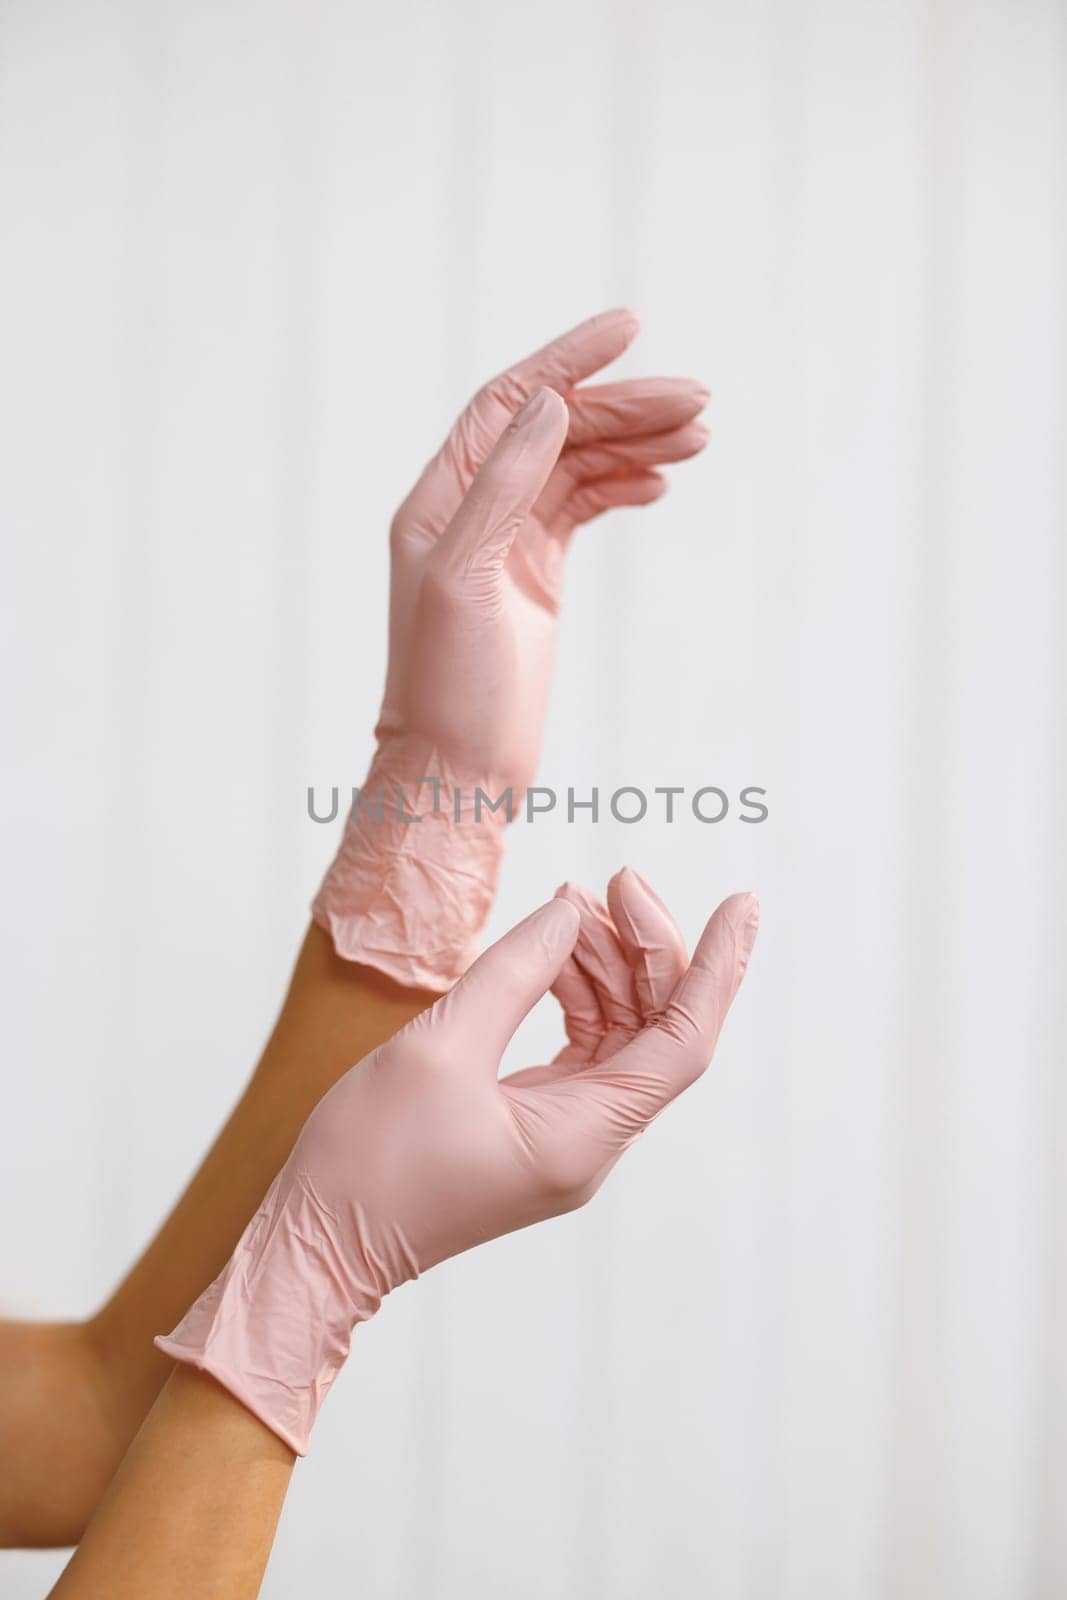 Hands wearing a pink latex glove. Two hands of a woman wearing gloves on a white background. Prevention of viral diseases by uflypro